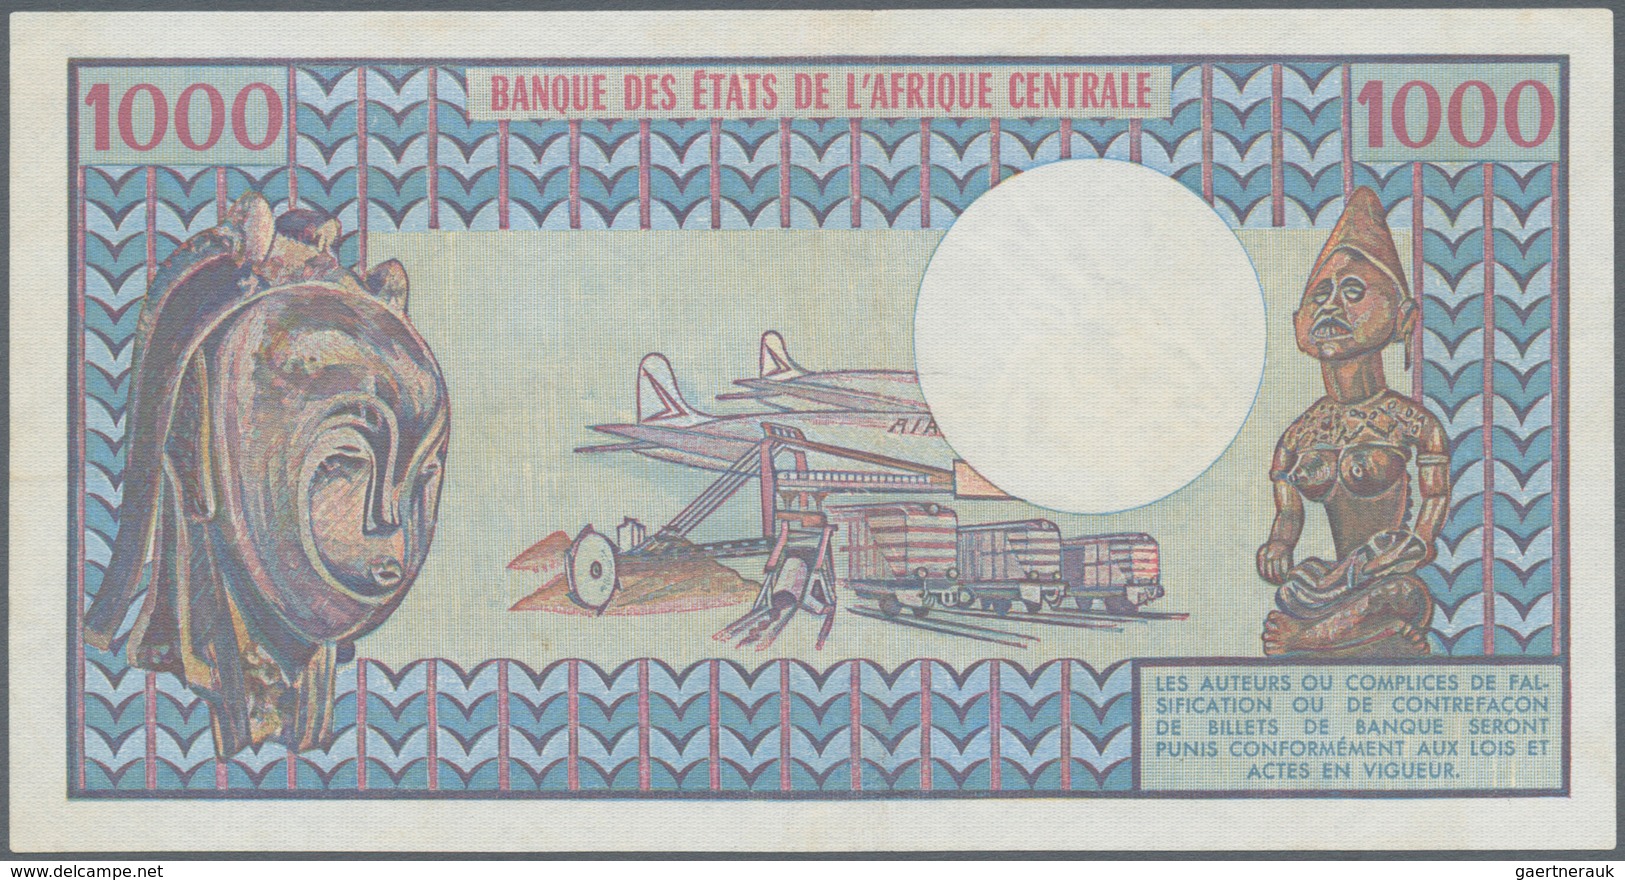 Chad / Tschad: 1000 Francs ND(1974) P. 3, Light Center Fold, Pressed, No Holes Or Tears, One Minor S - Tschad